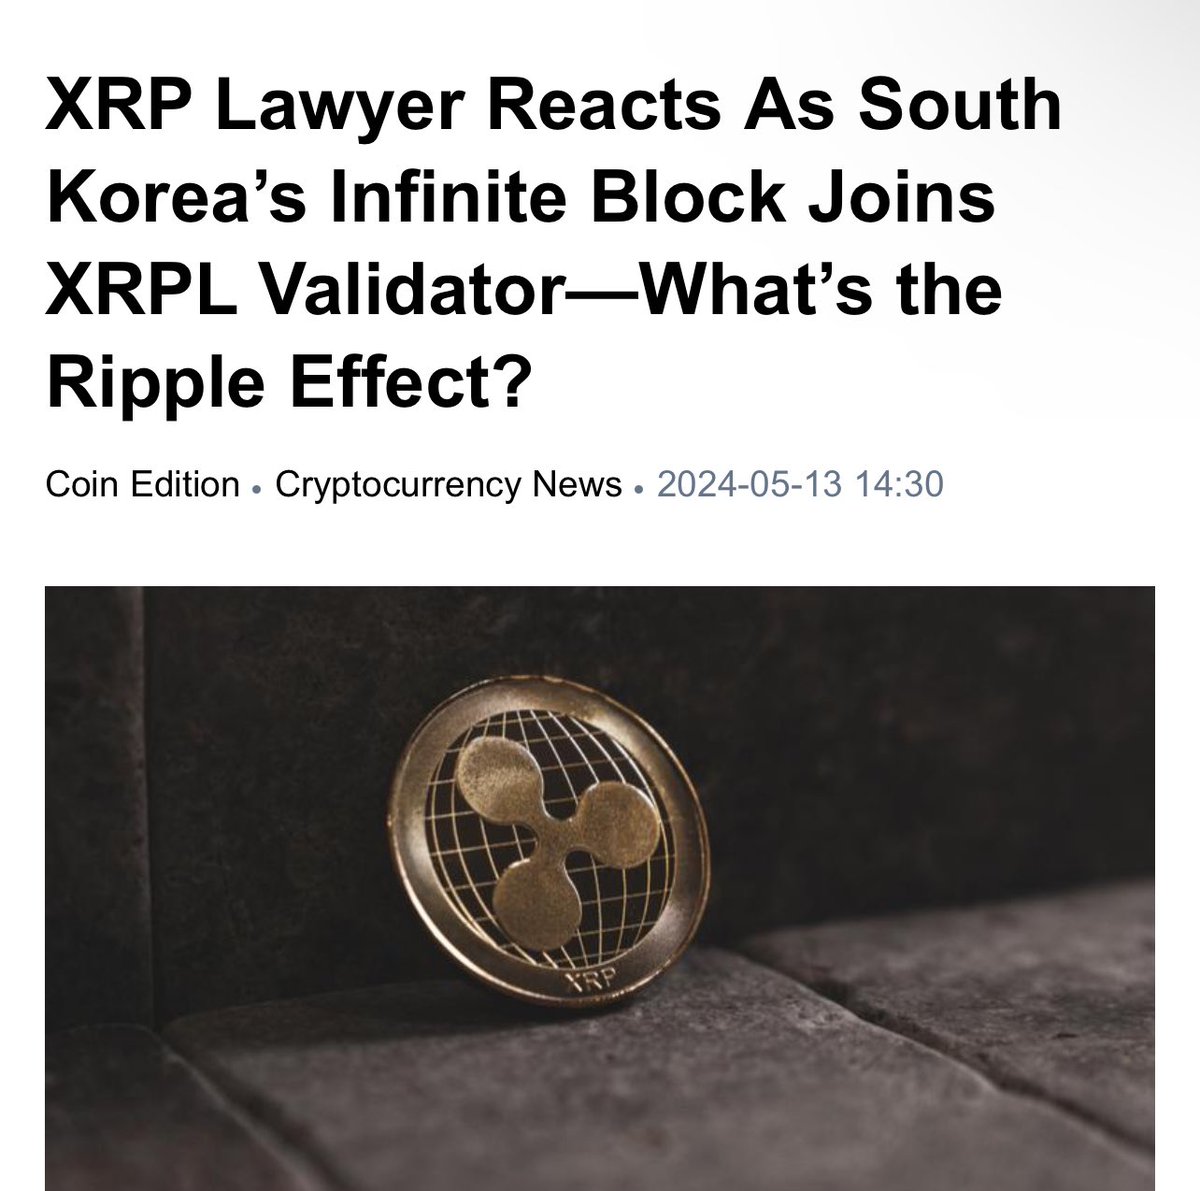 🚨 Korea Firm Joins XRPL as Validator, Data confirms $250 billion worth of transactions using digital Yuan by July 2023! XRPL defi space expected to explode as a result, top XRPL defi @TokenCTF likely to hit new ALL time High!

The total supply of the top defi token on #XRPL, CTF…